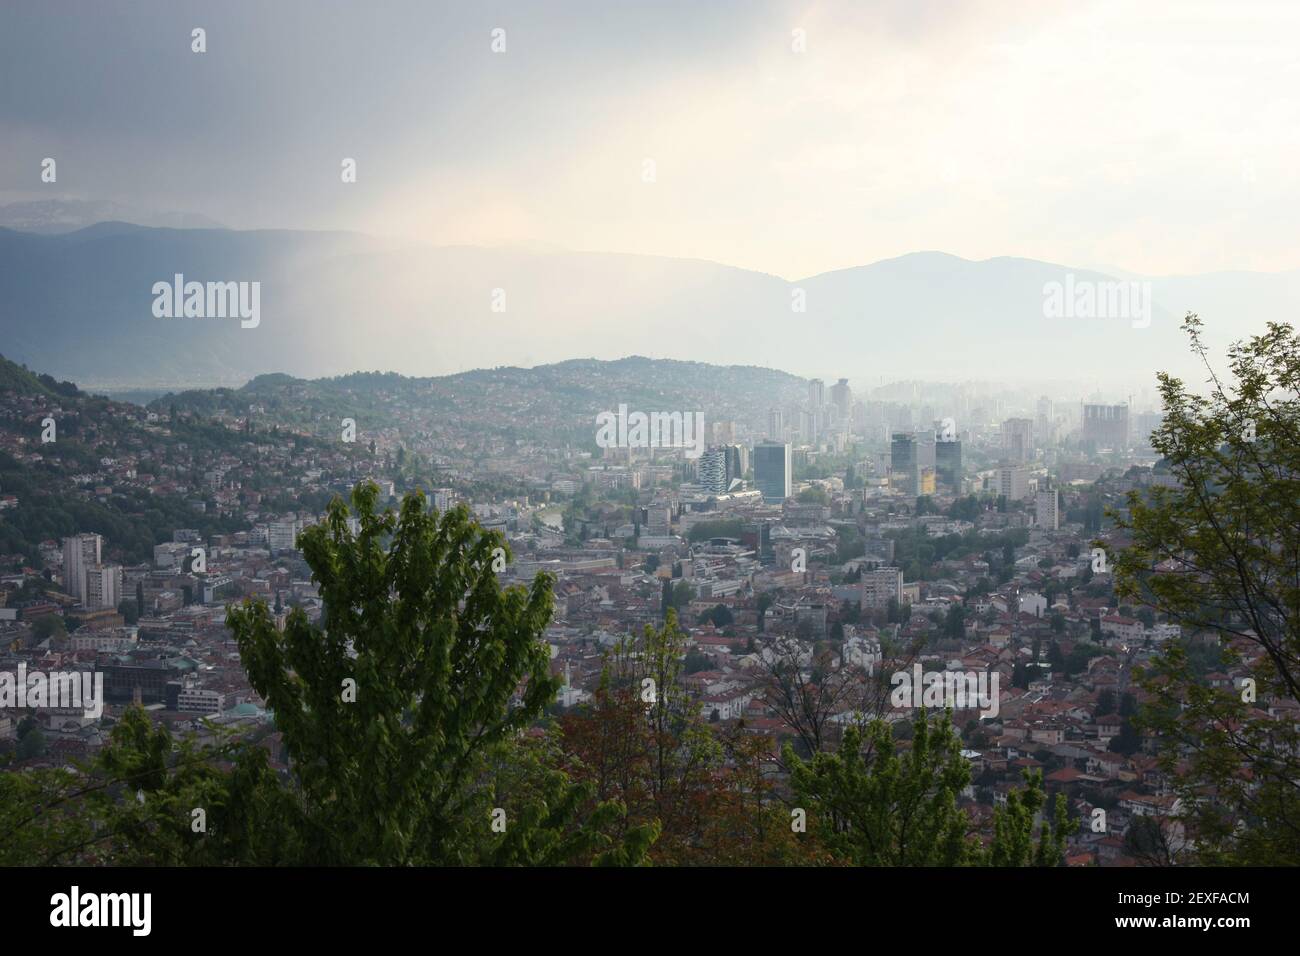 View on Sarajevo from the hills with skyskrapers on a foggy day Stock Photo